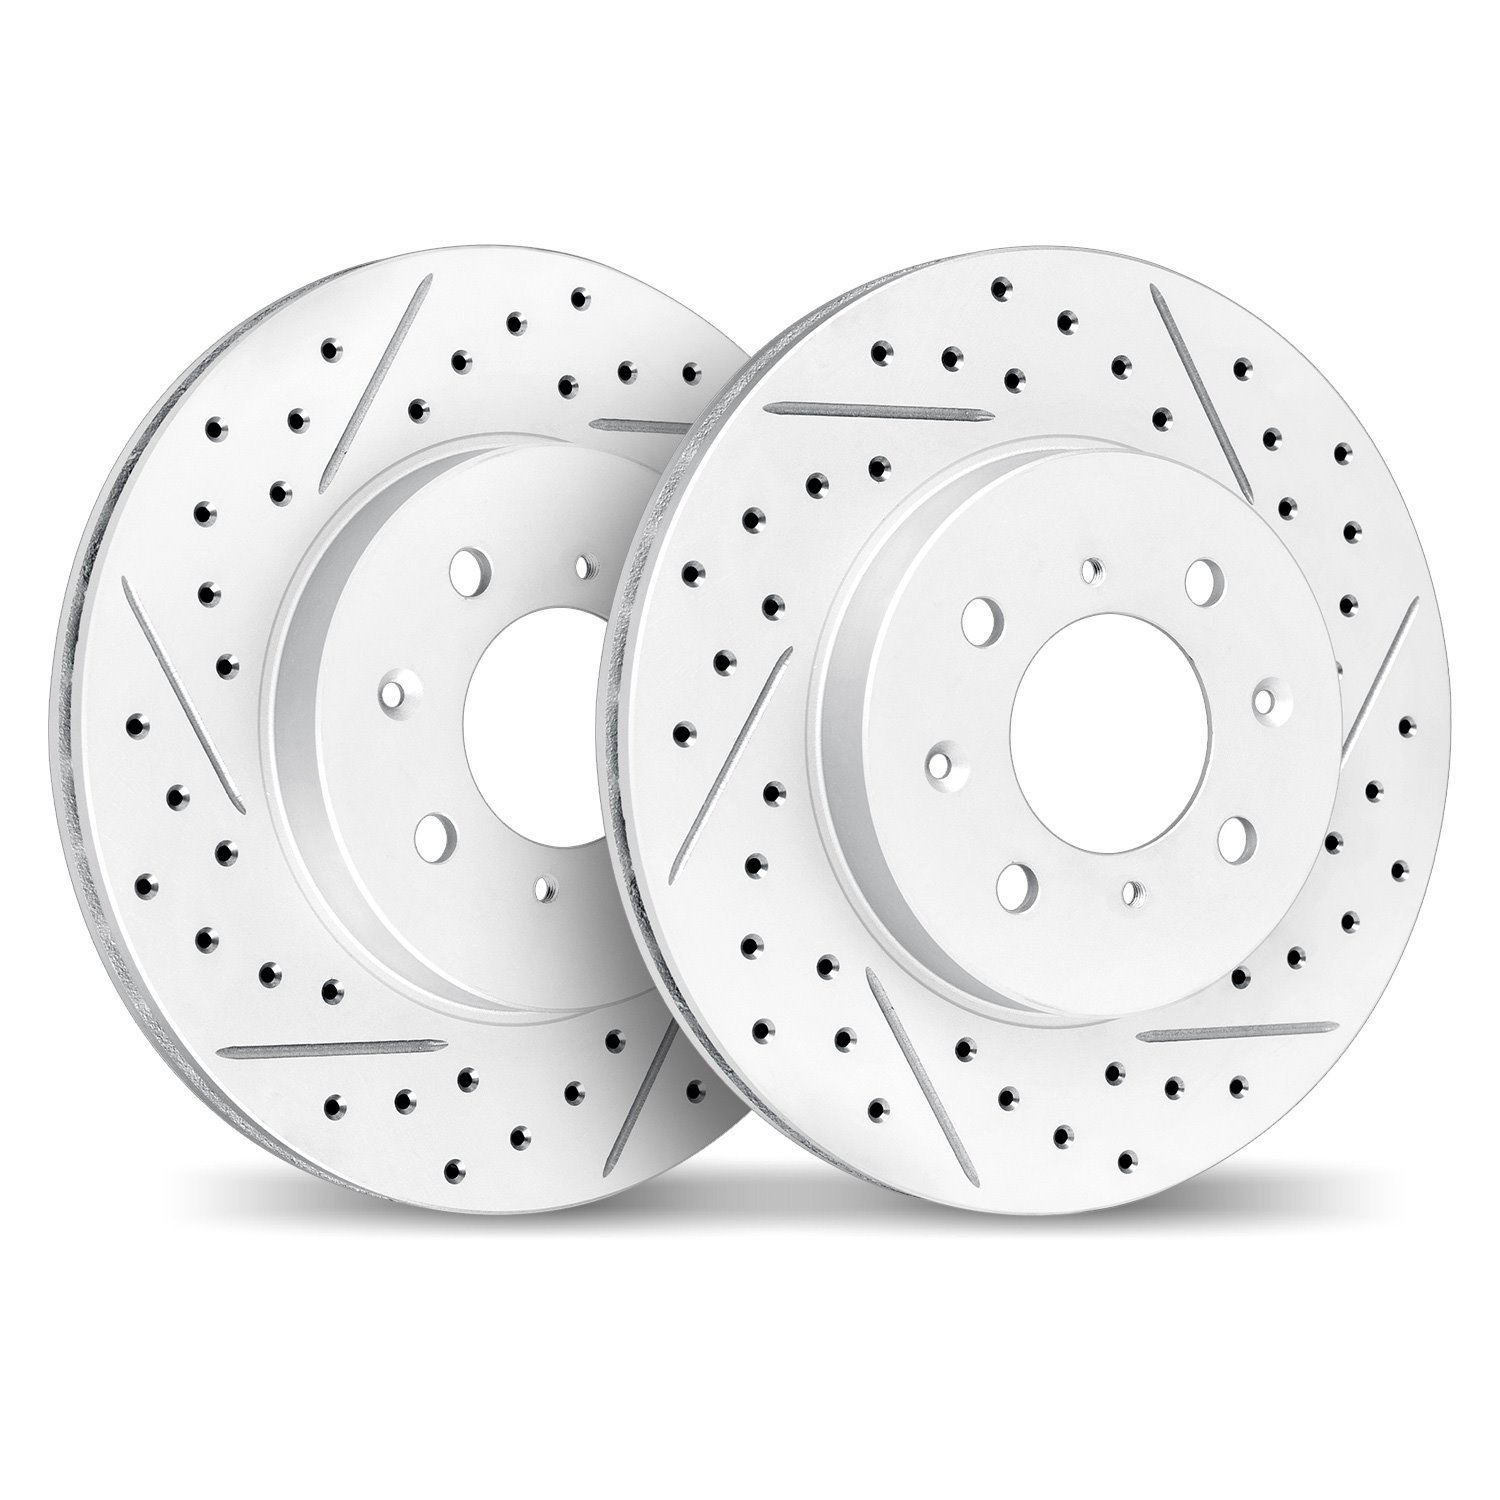 2002-54032 Geoperformance Drilled/Slotted Brake Rotors, 1990-2001 Ford/Lincoln/Mercury/Mazda, Position: Front